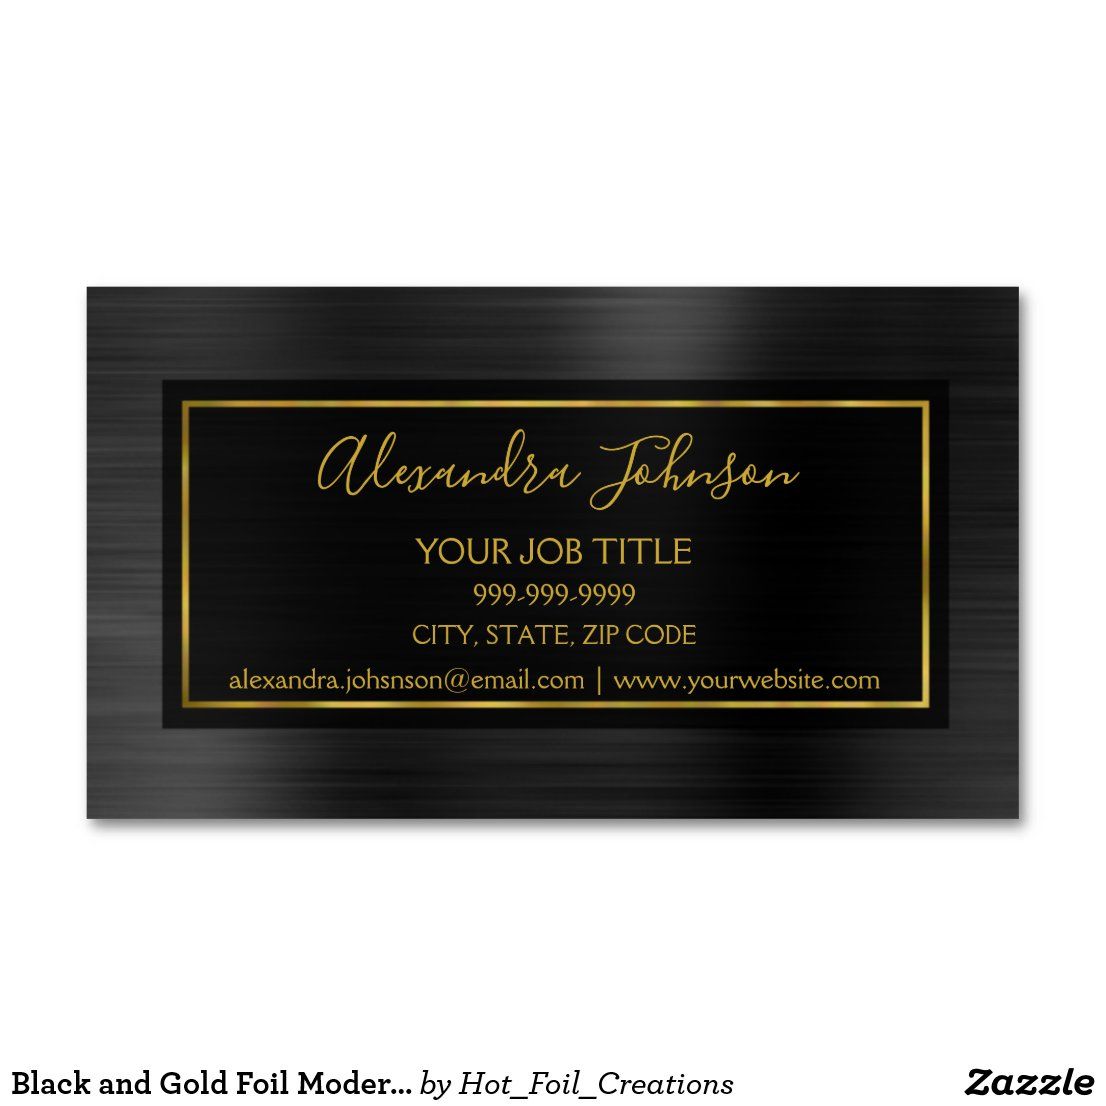 black and gold foil business cards 5